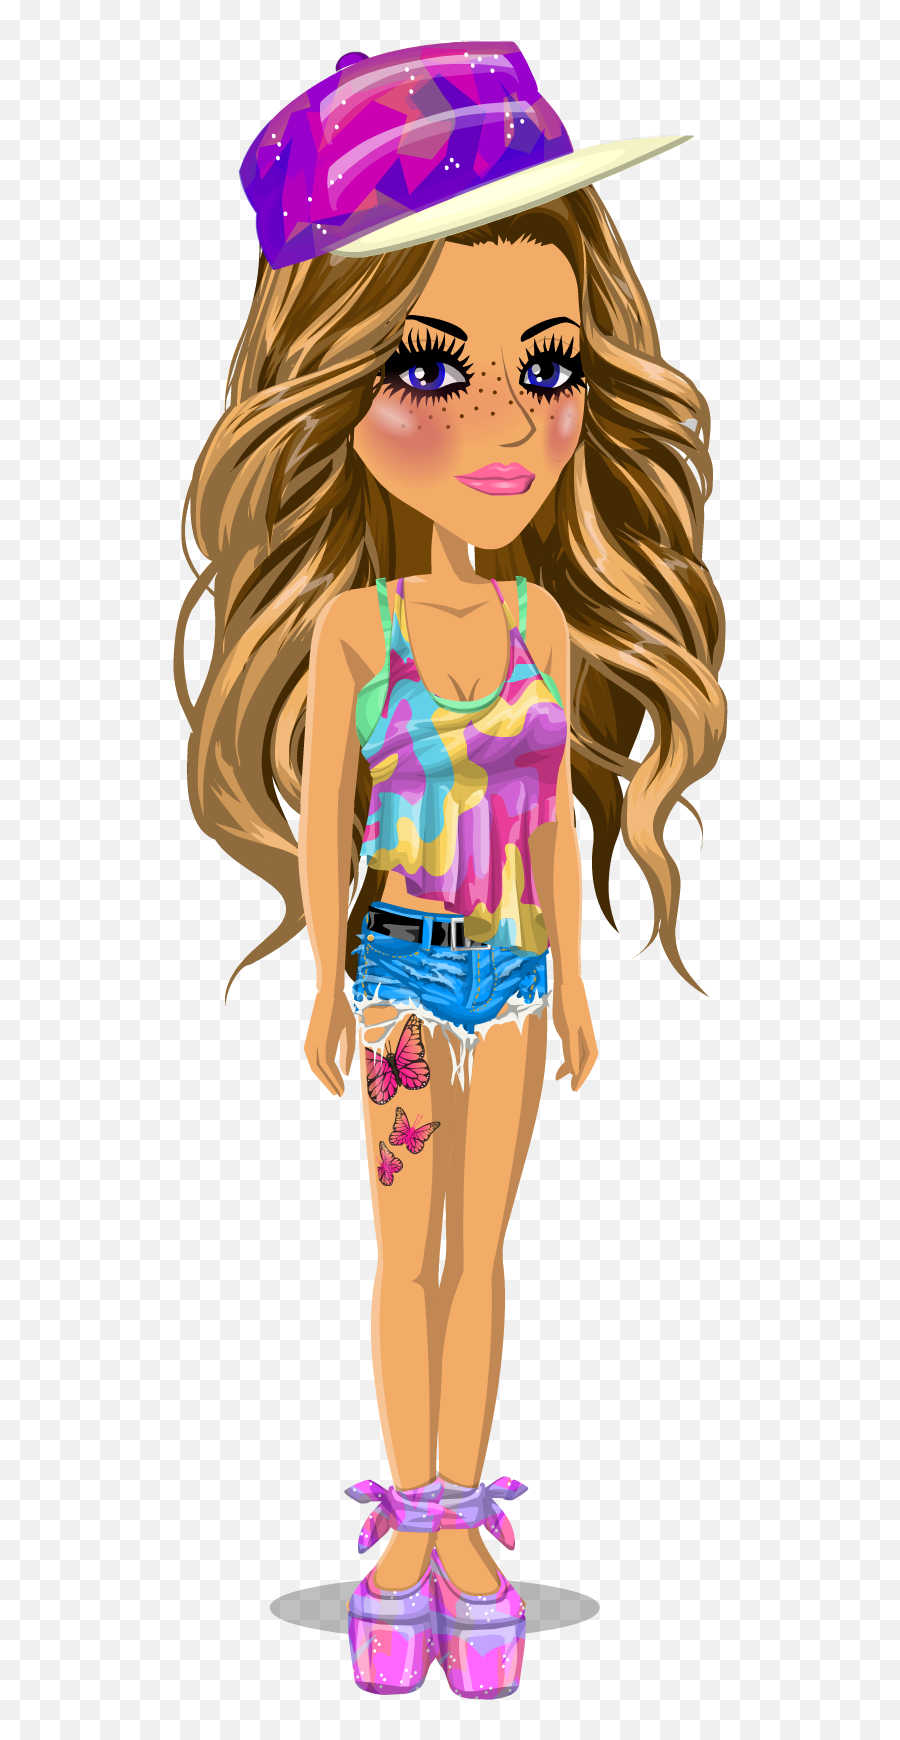 Msp Vip Fille Magnifique - Girly Emoji,How To Use The Emojis That Are For Diamonds On Msp